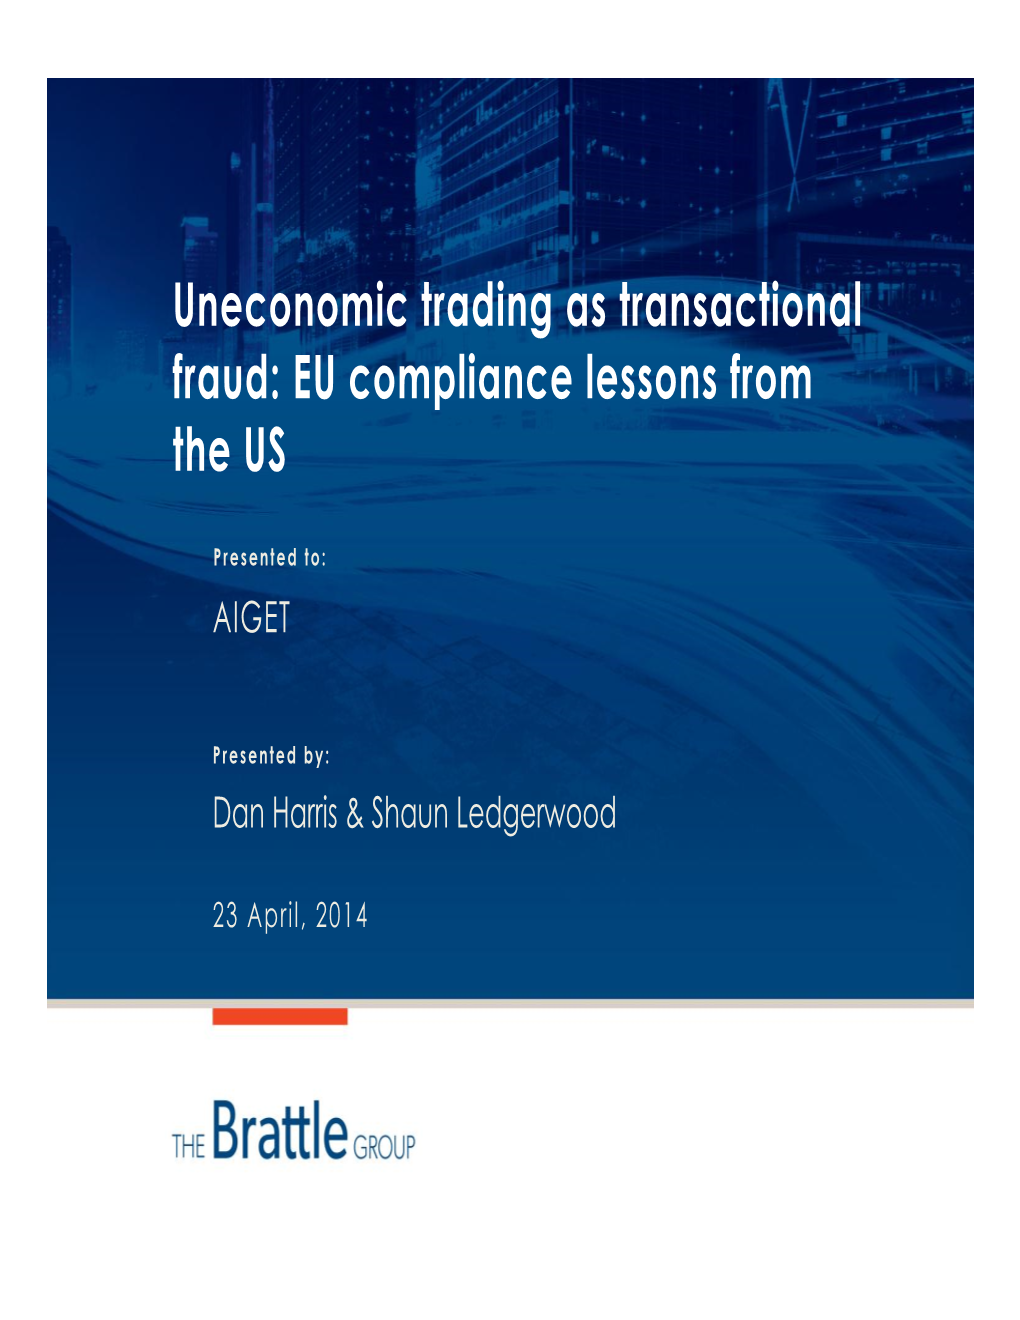 Uneconomic Trading As Transactional Fraud: EU Compliance Lessons from the US